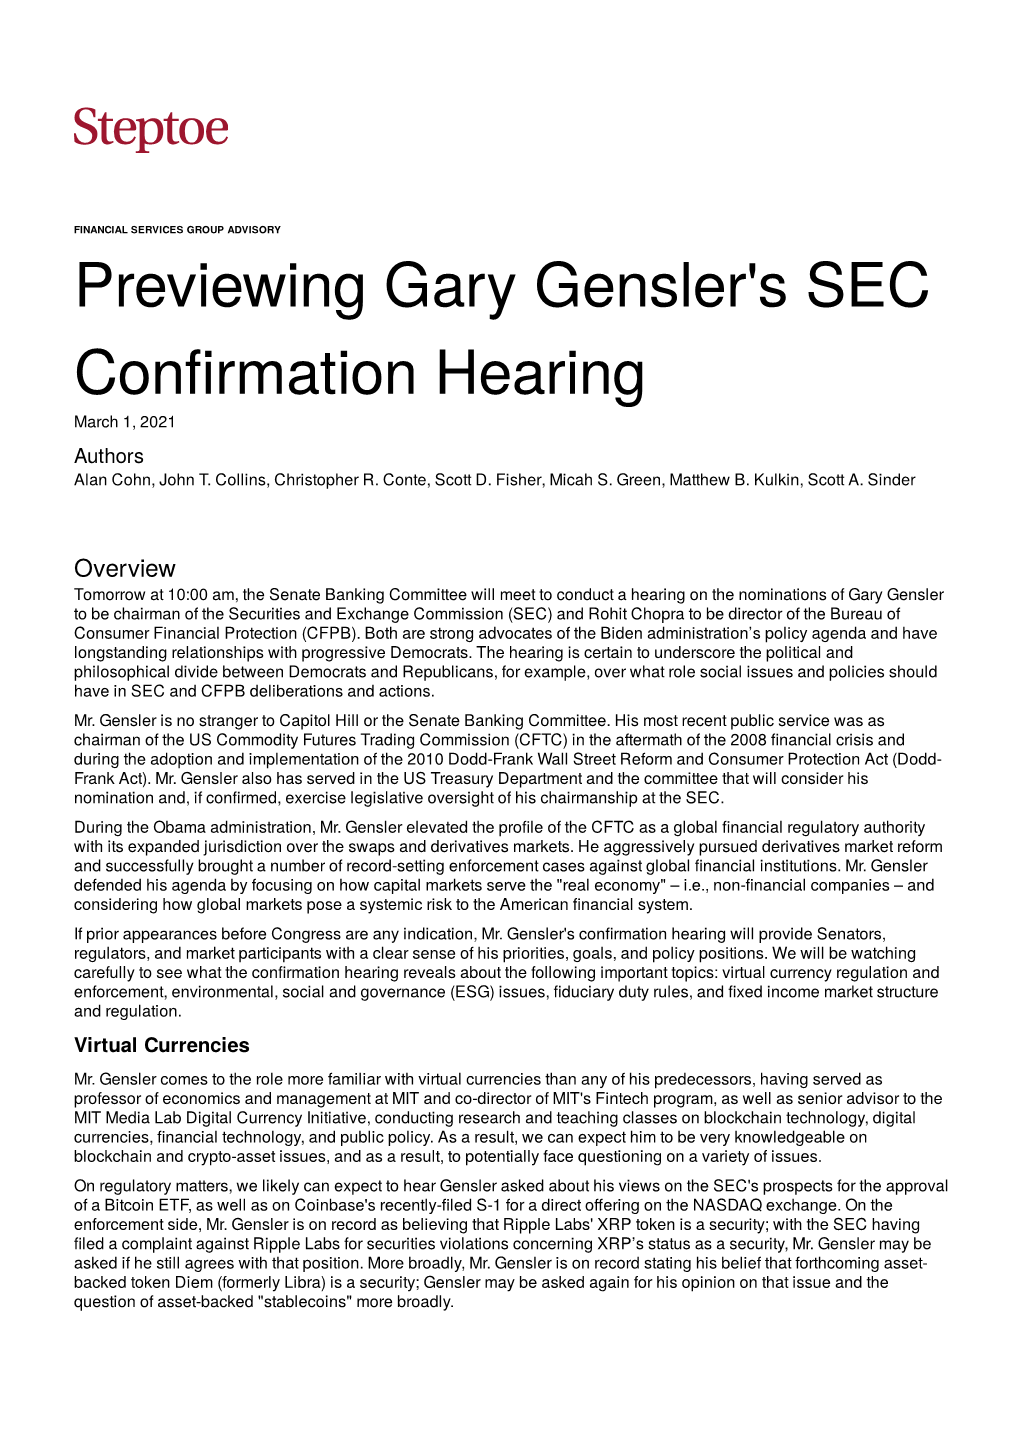 Previewing Gary Gensler's SEC Confirmation Hearing